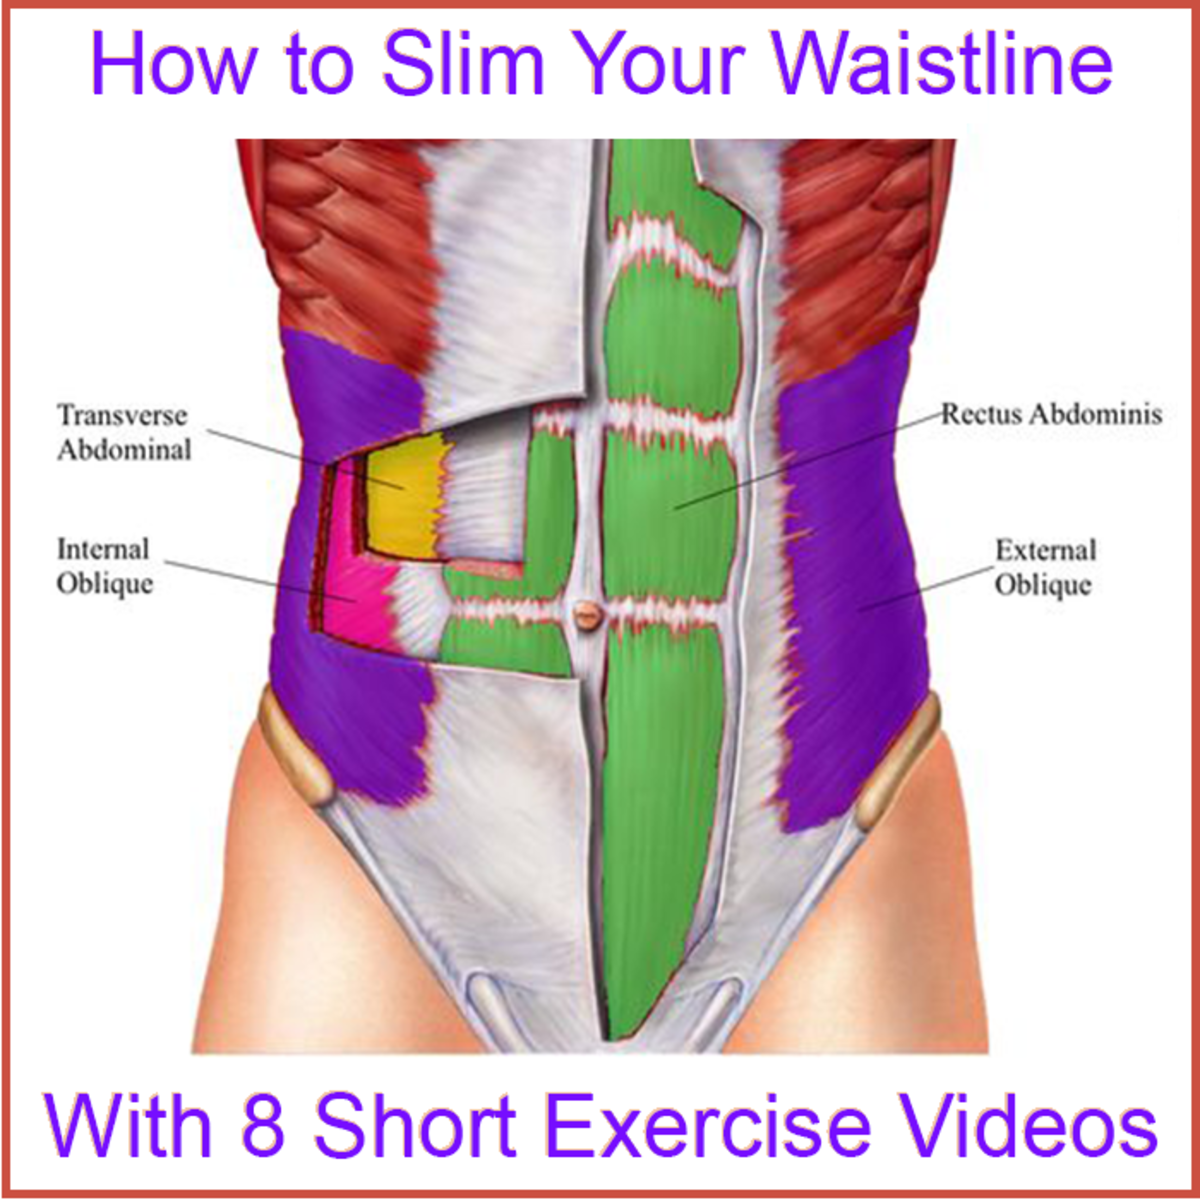 Muscles that can be trained to slim the waistline.